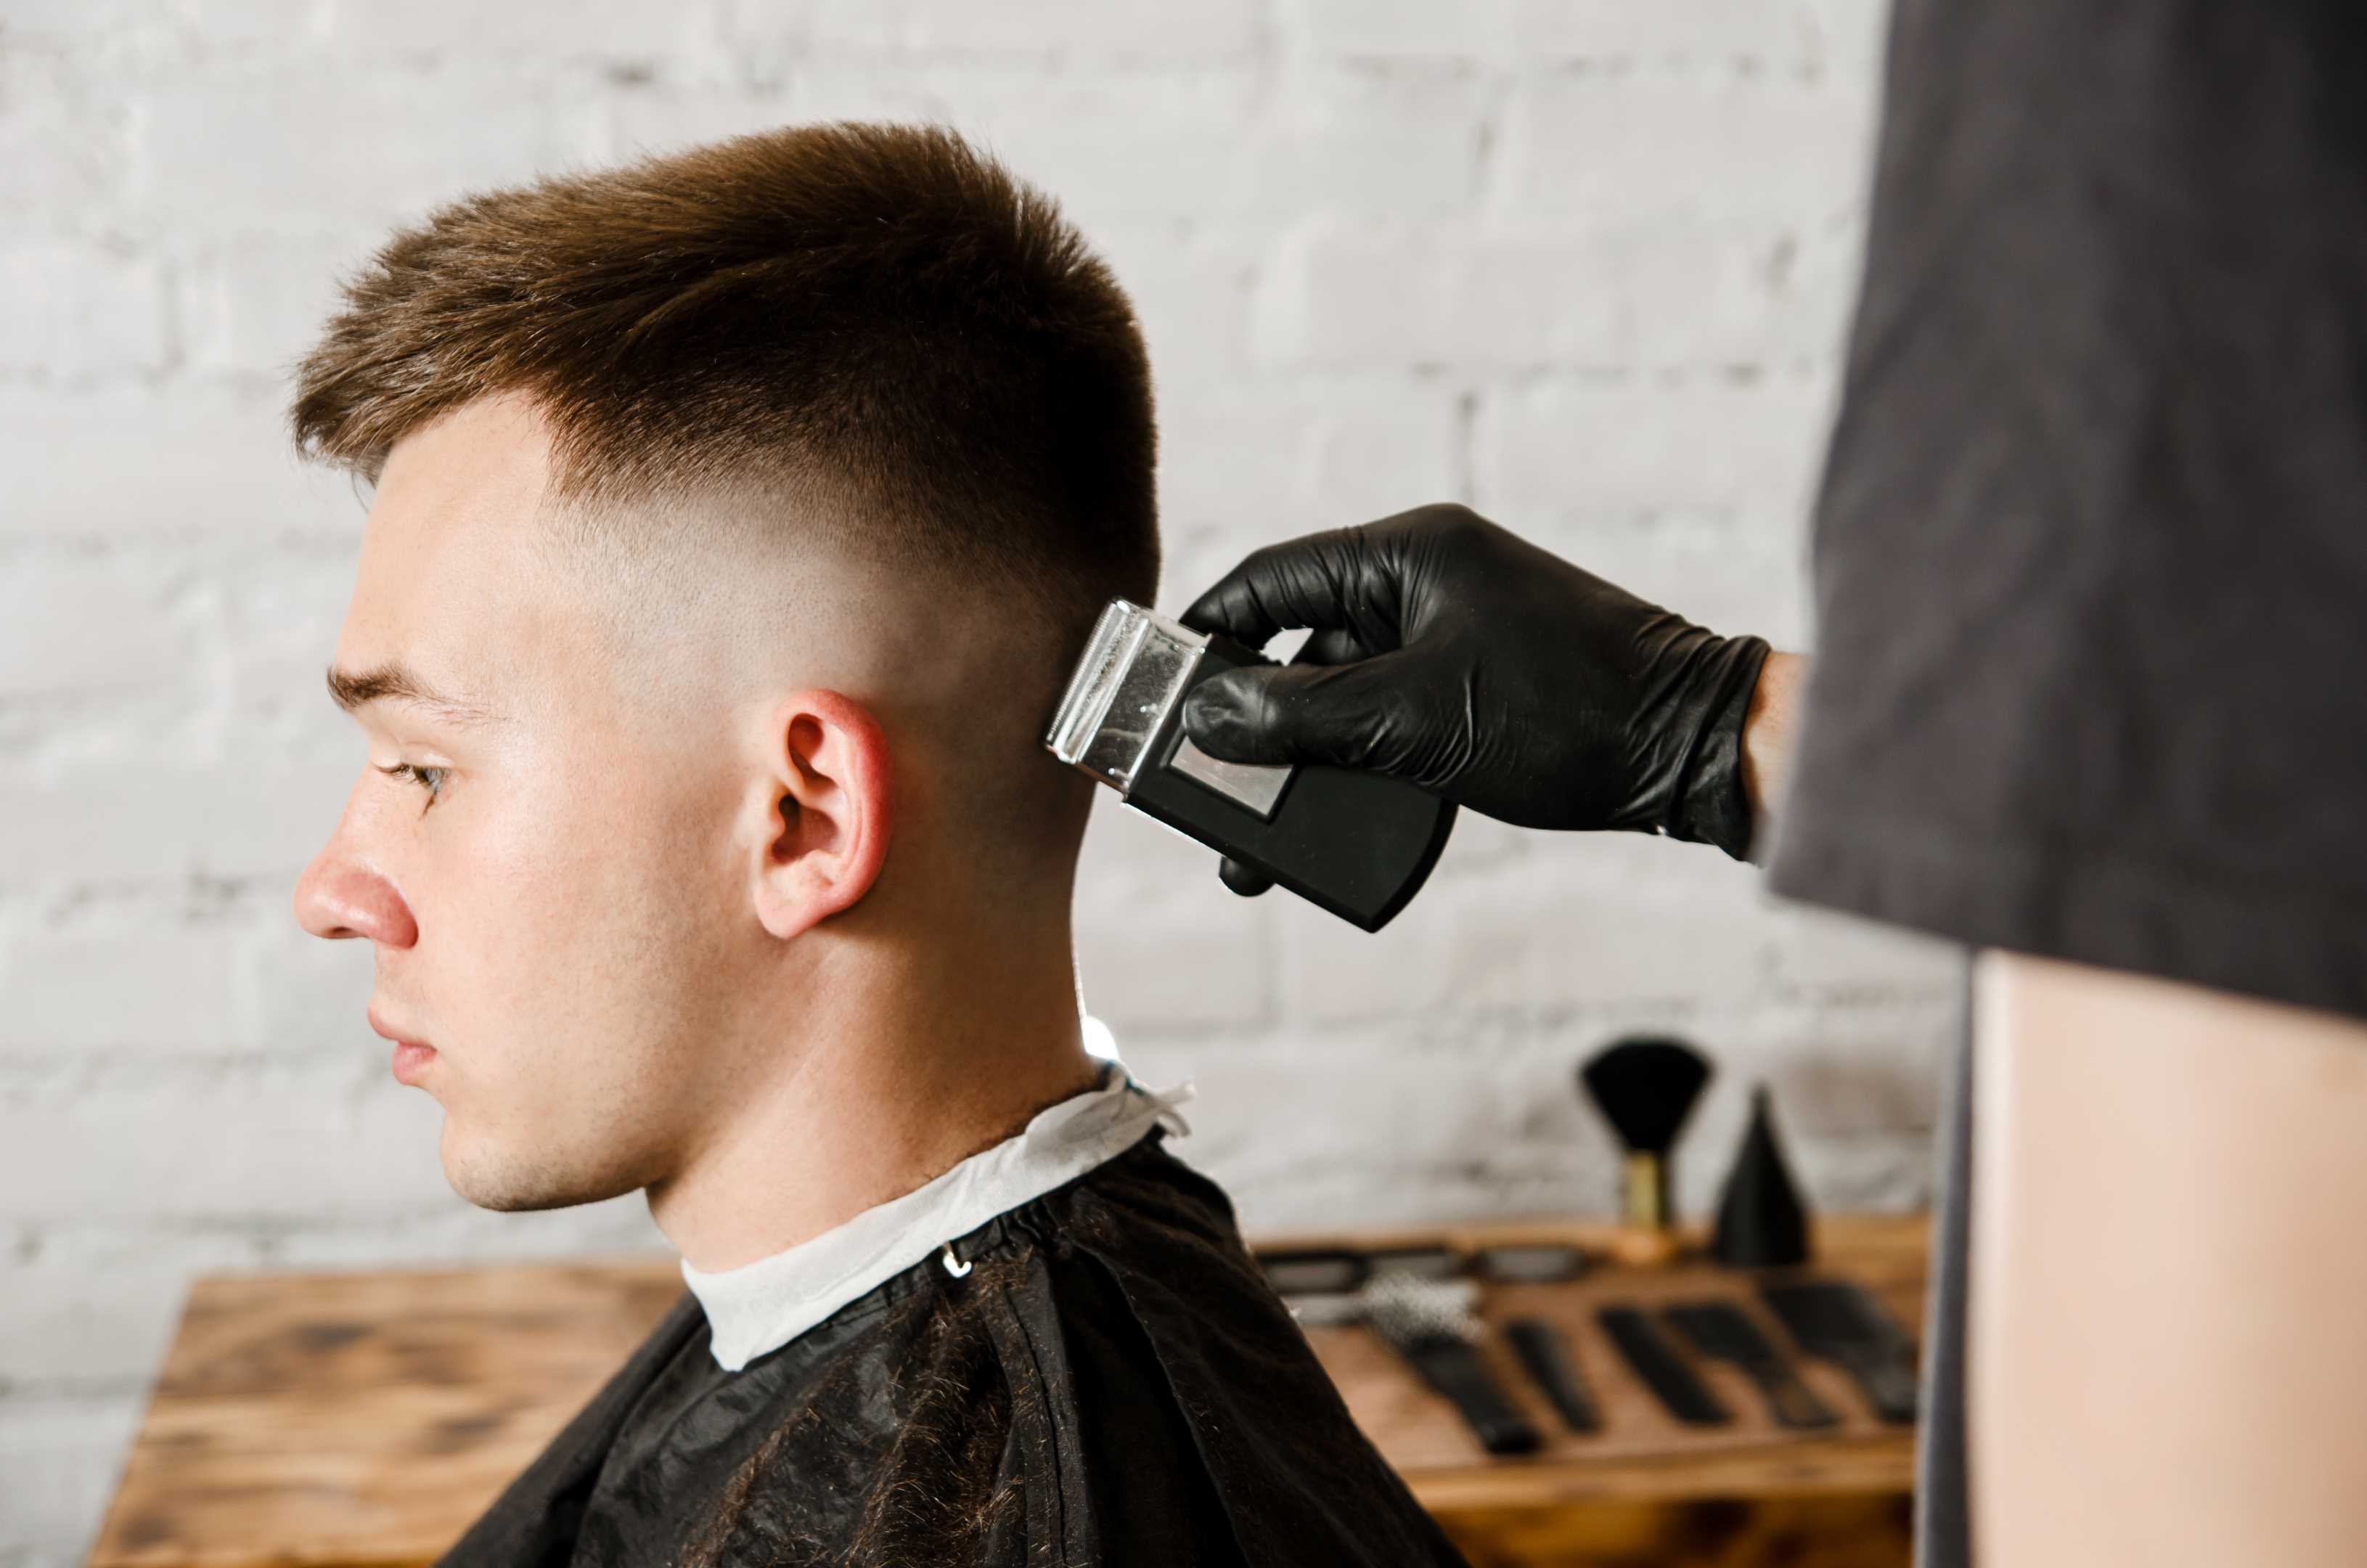 POPULAR MEN'S HAIRCUTS AND HAIRSTYLES FOR THE MOMENT